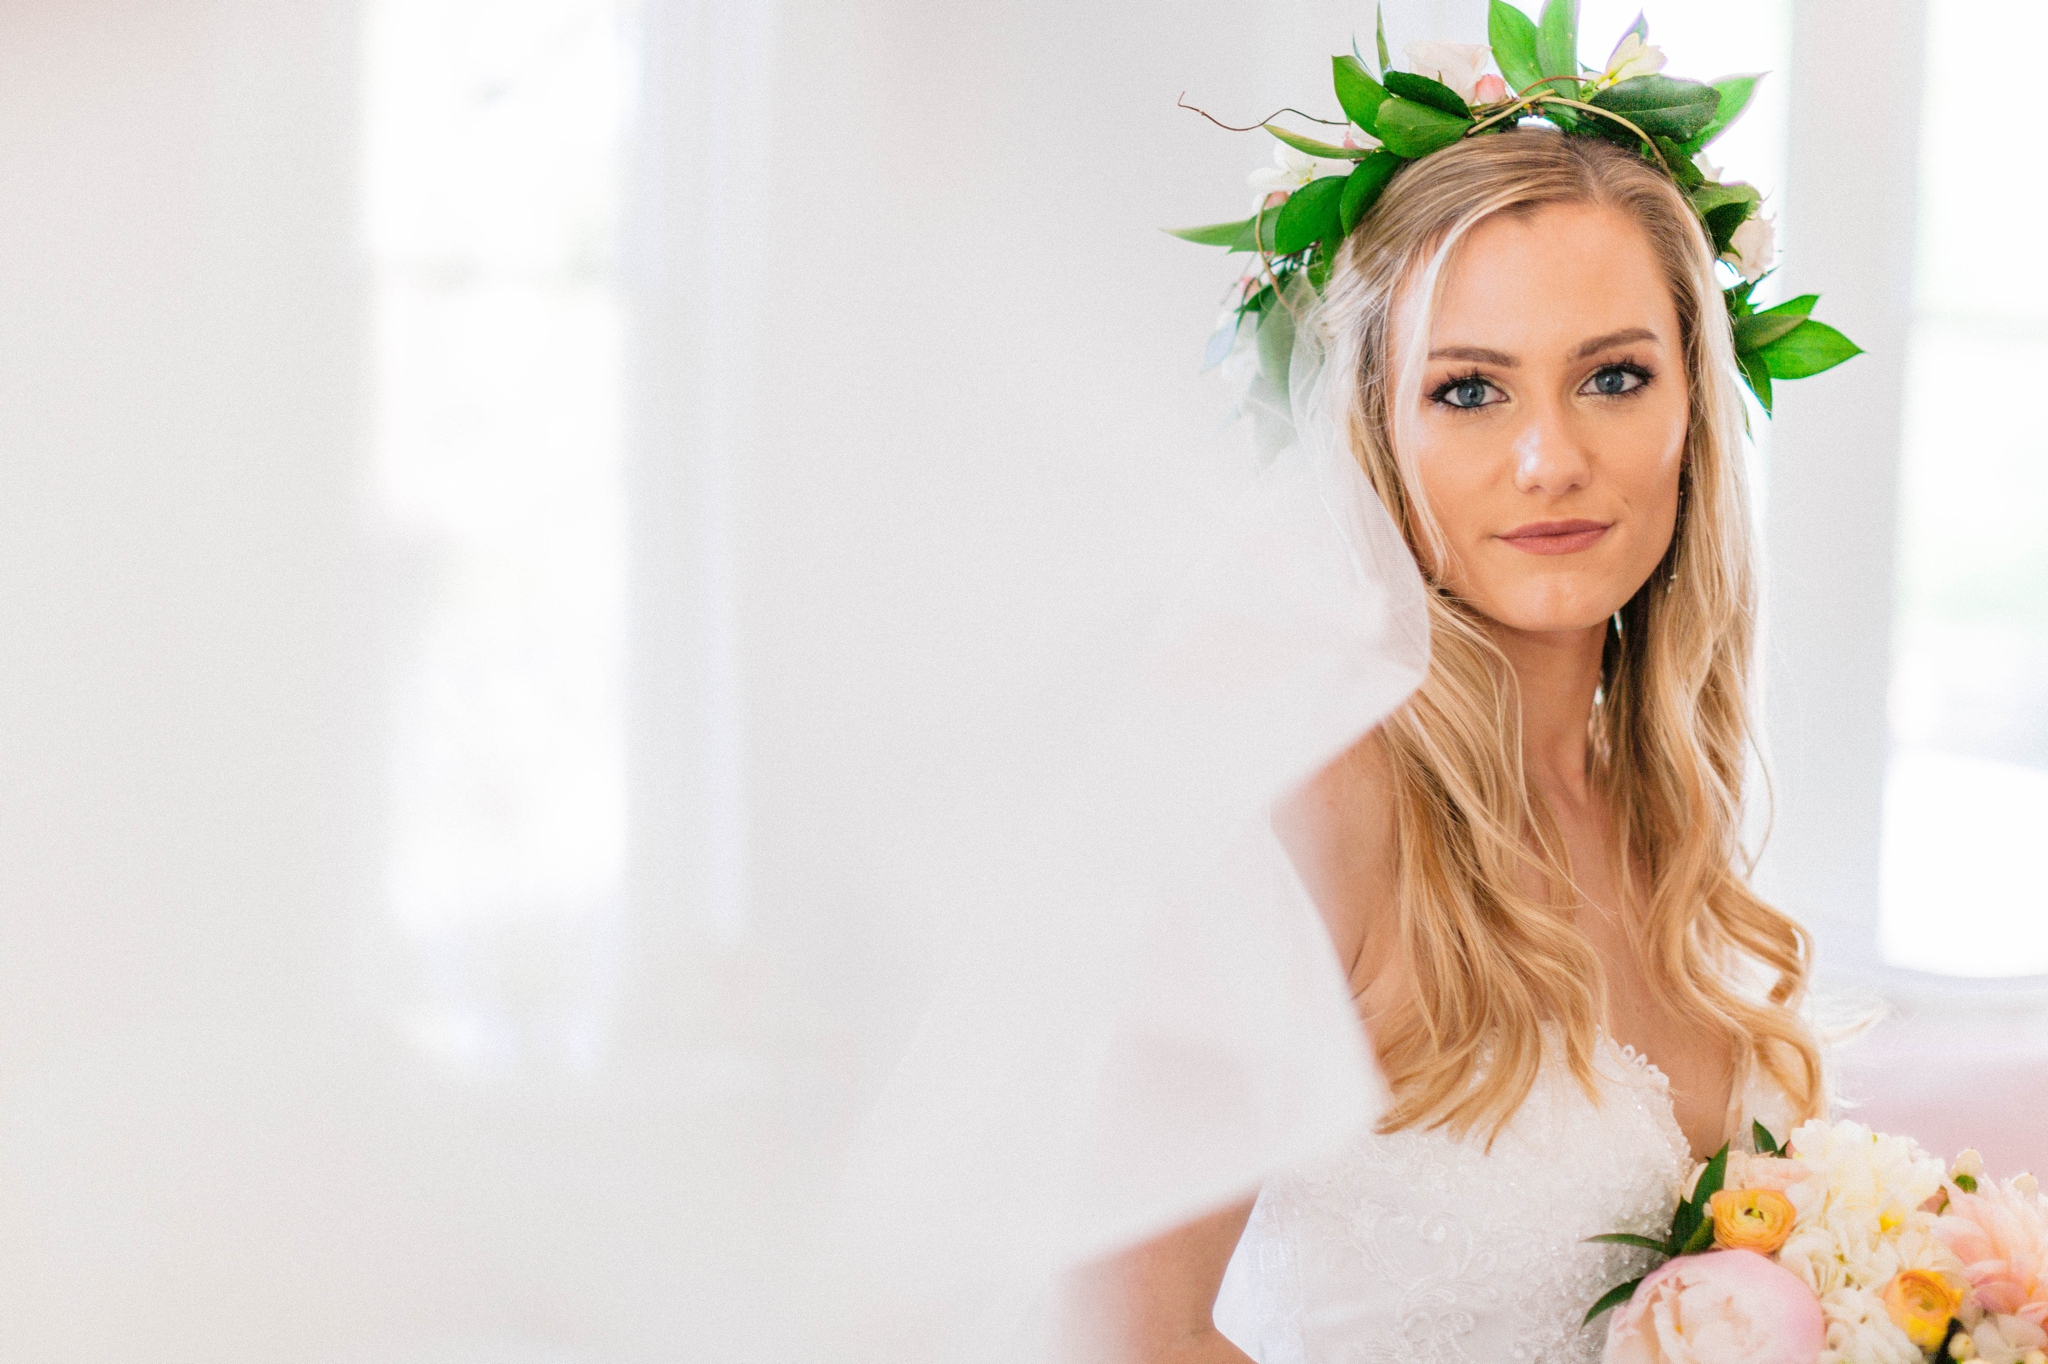  Veil shot - Indoor Bridal Portraits in an all white room at a luxury estate with natural light before the ceremony - Bride is wearing a Hawaiian Flower Crown and a cathedral veil in a Wedding Gown by Stella York and standing in the doorway with a go